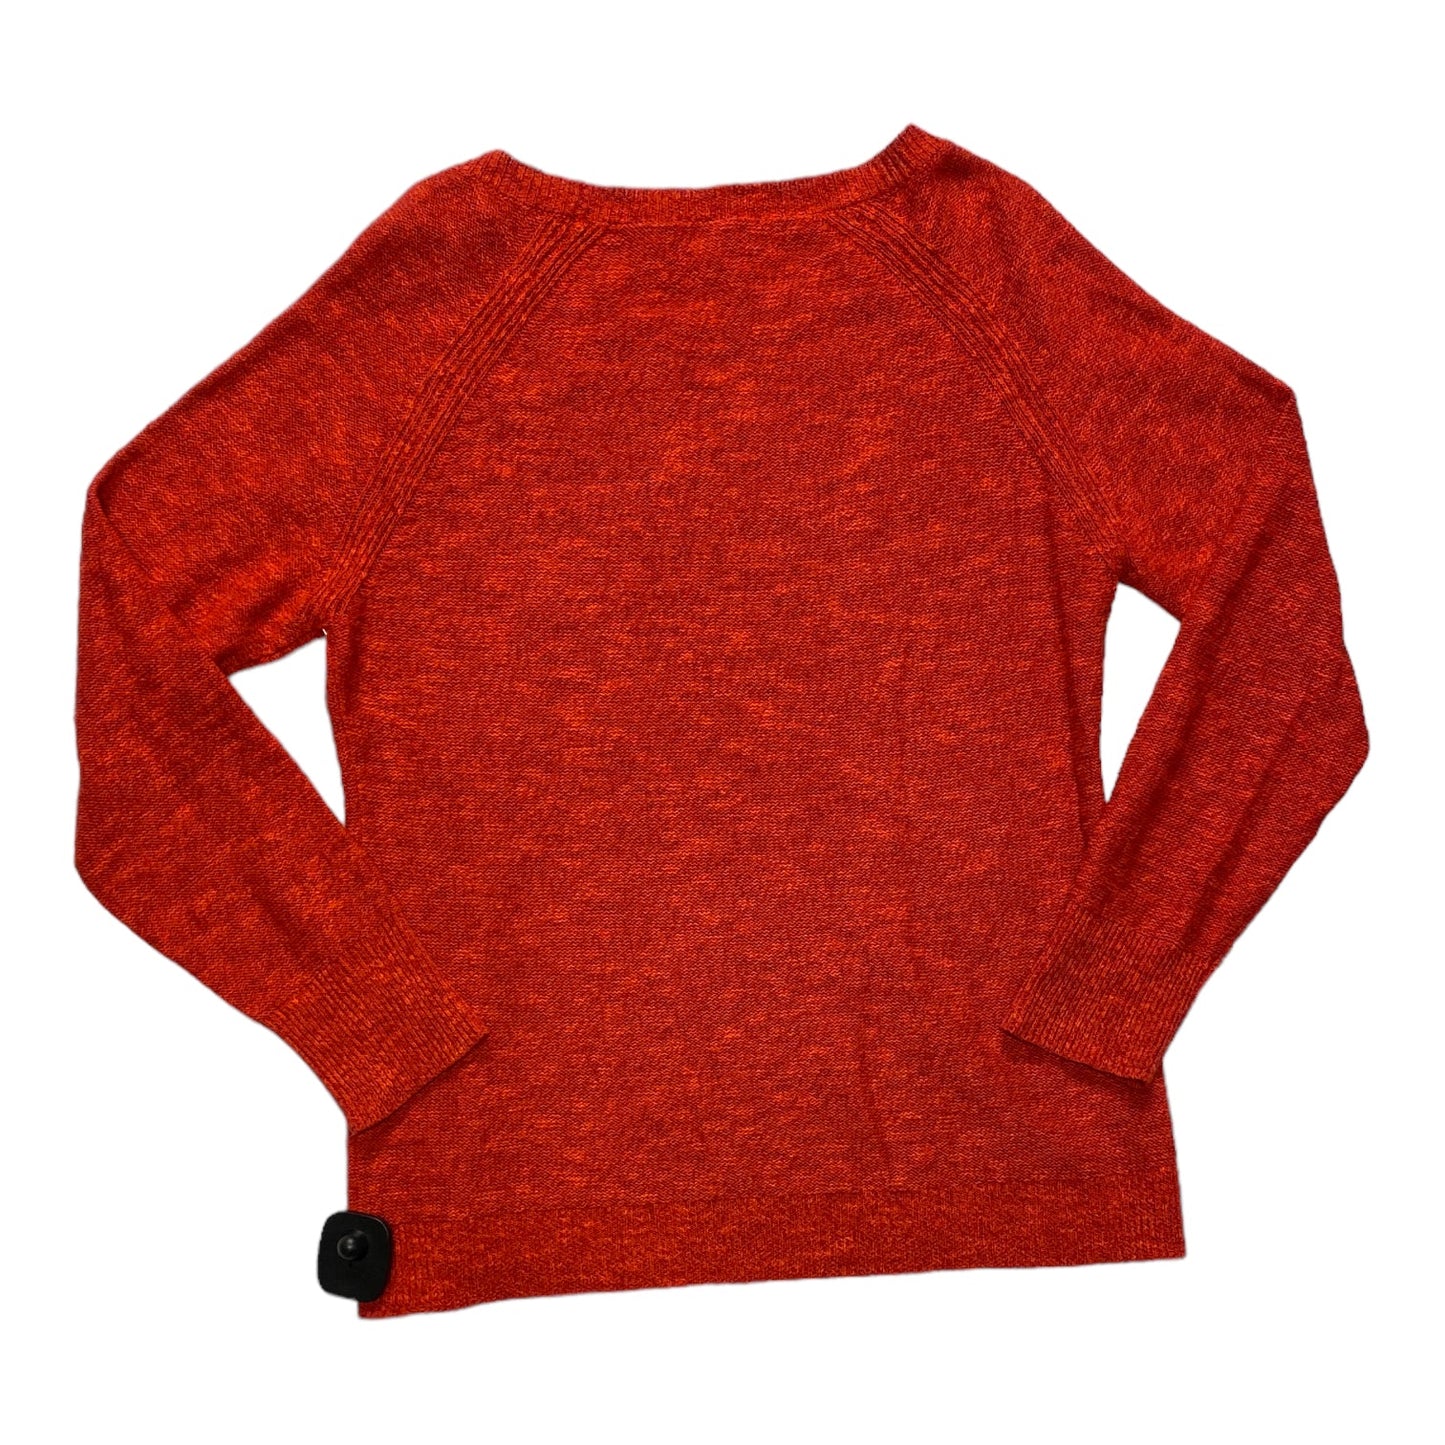 Sweater Designer By Eileen Fisher  Size: S